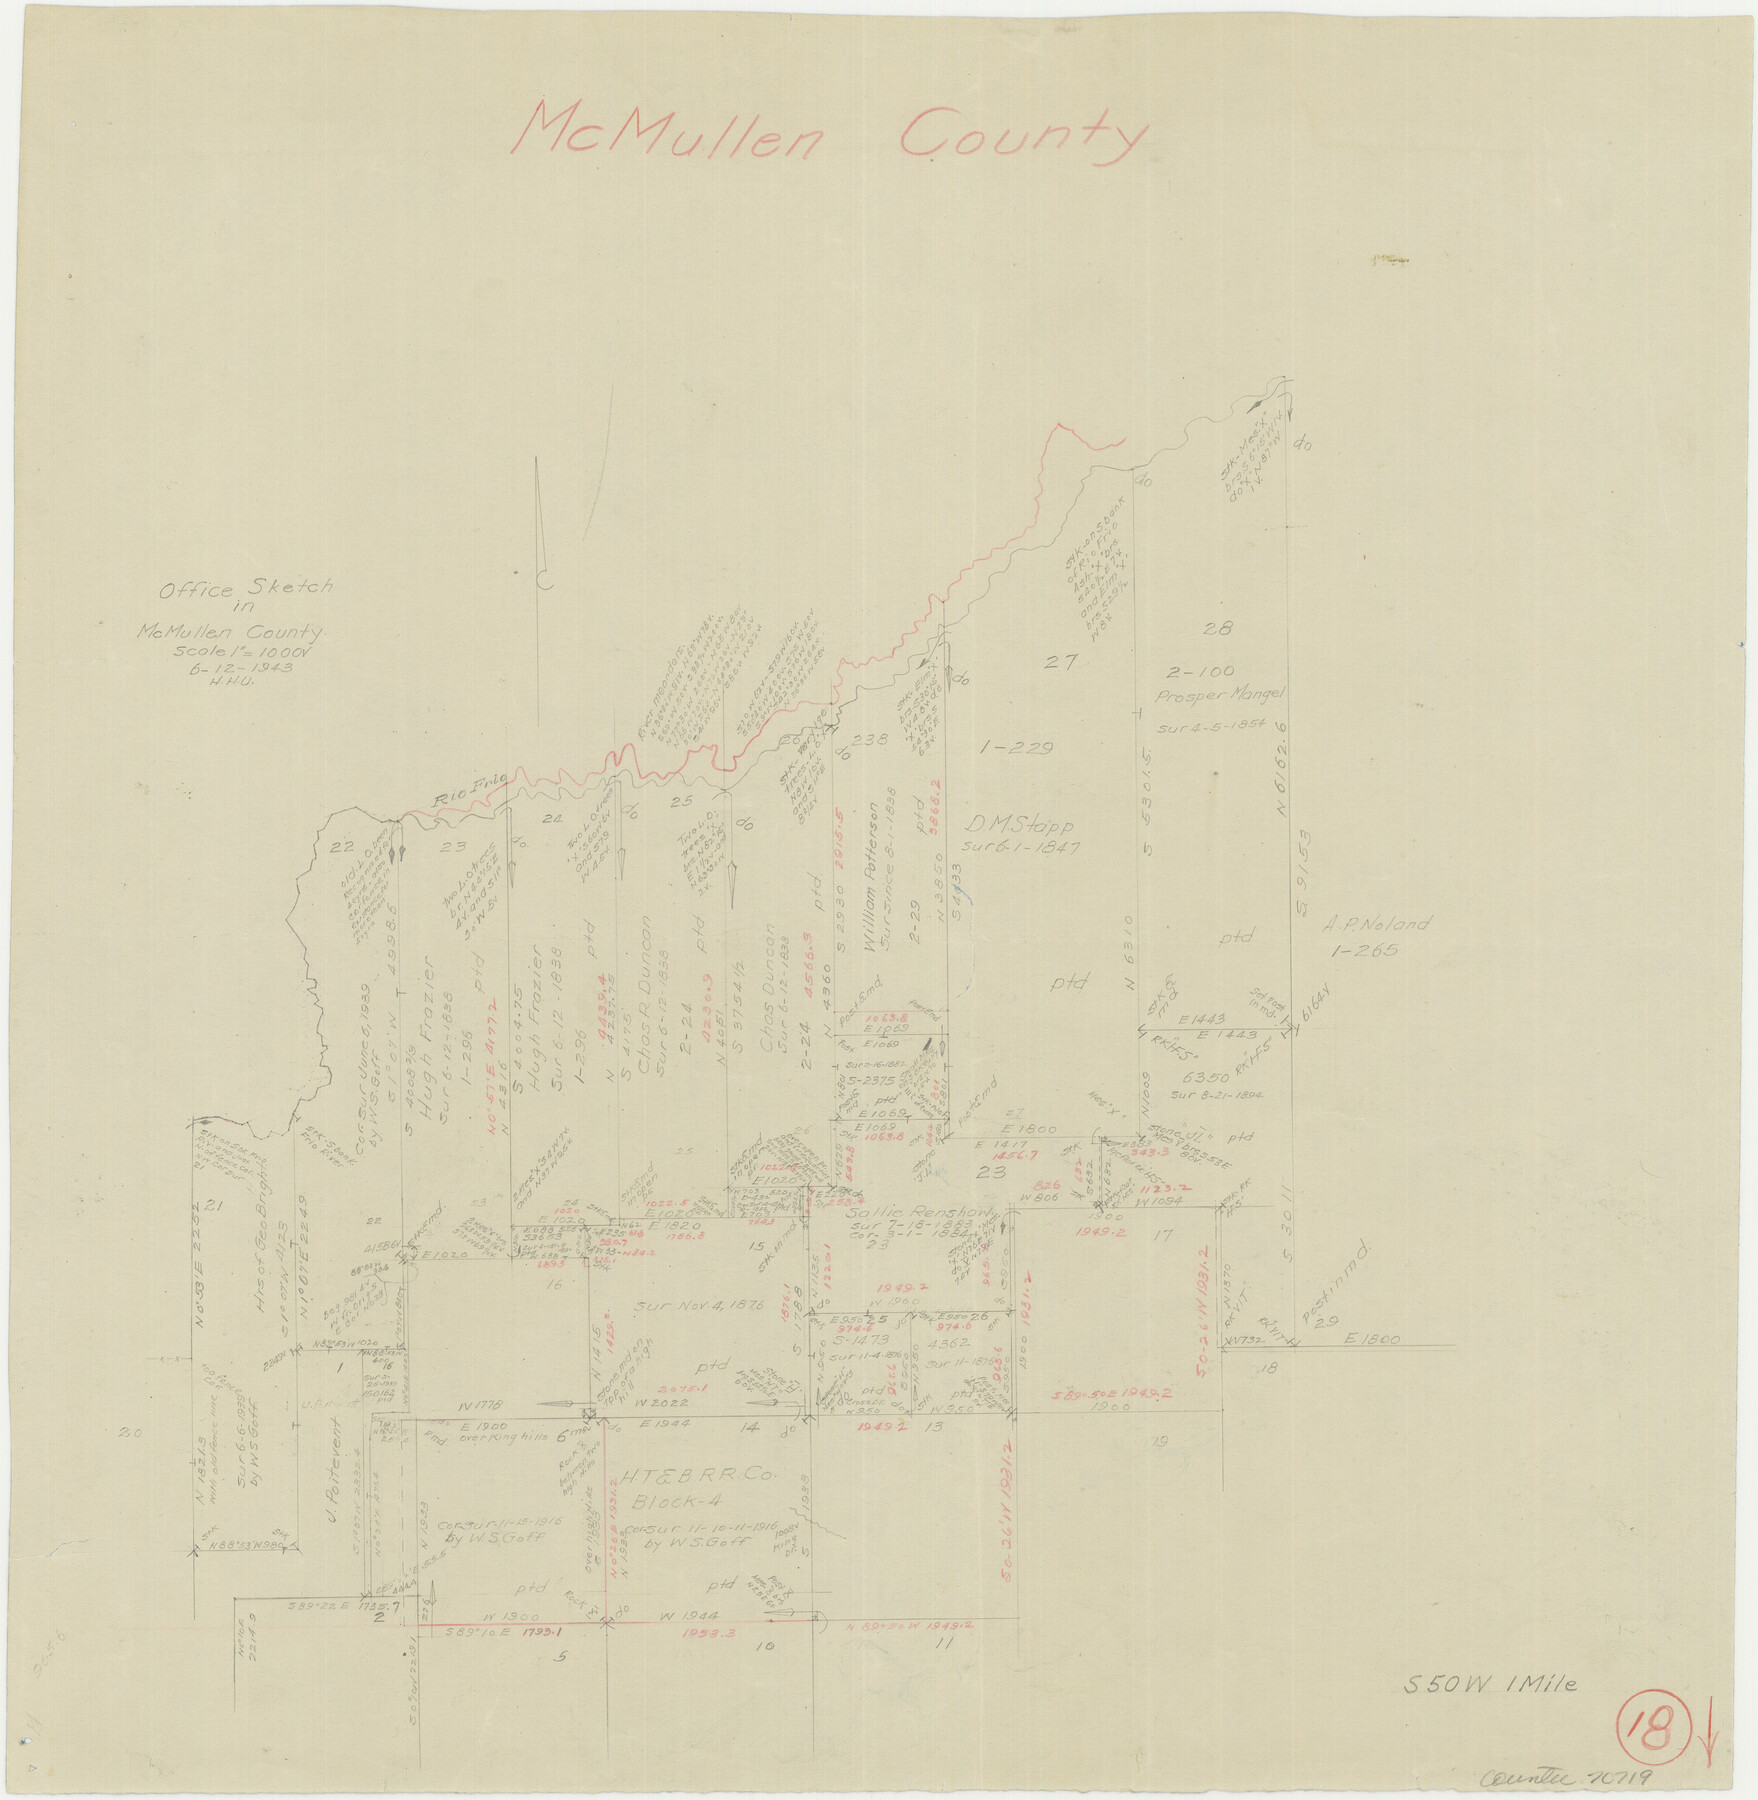 70719, McMullen County Working Sketch 18, General Map Collection